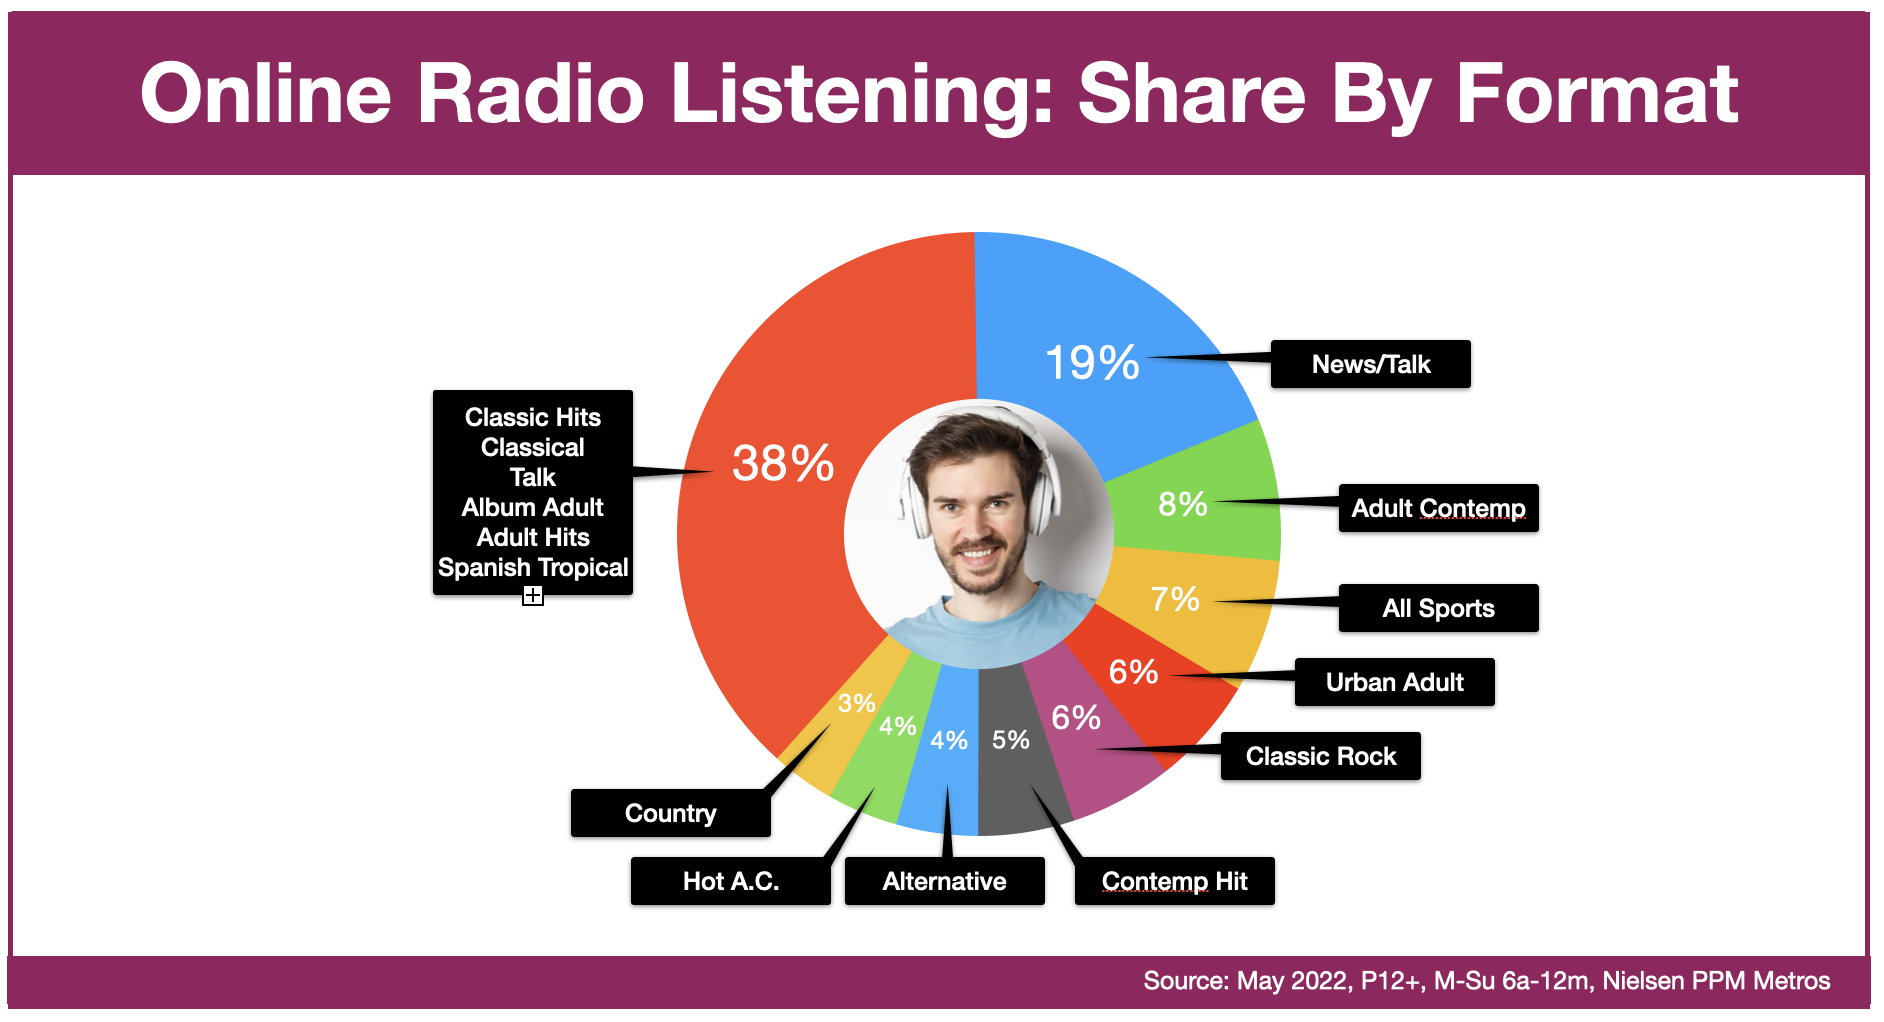 Advertise In Charlotte: Online Radio Listening By Format